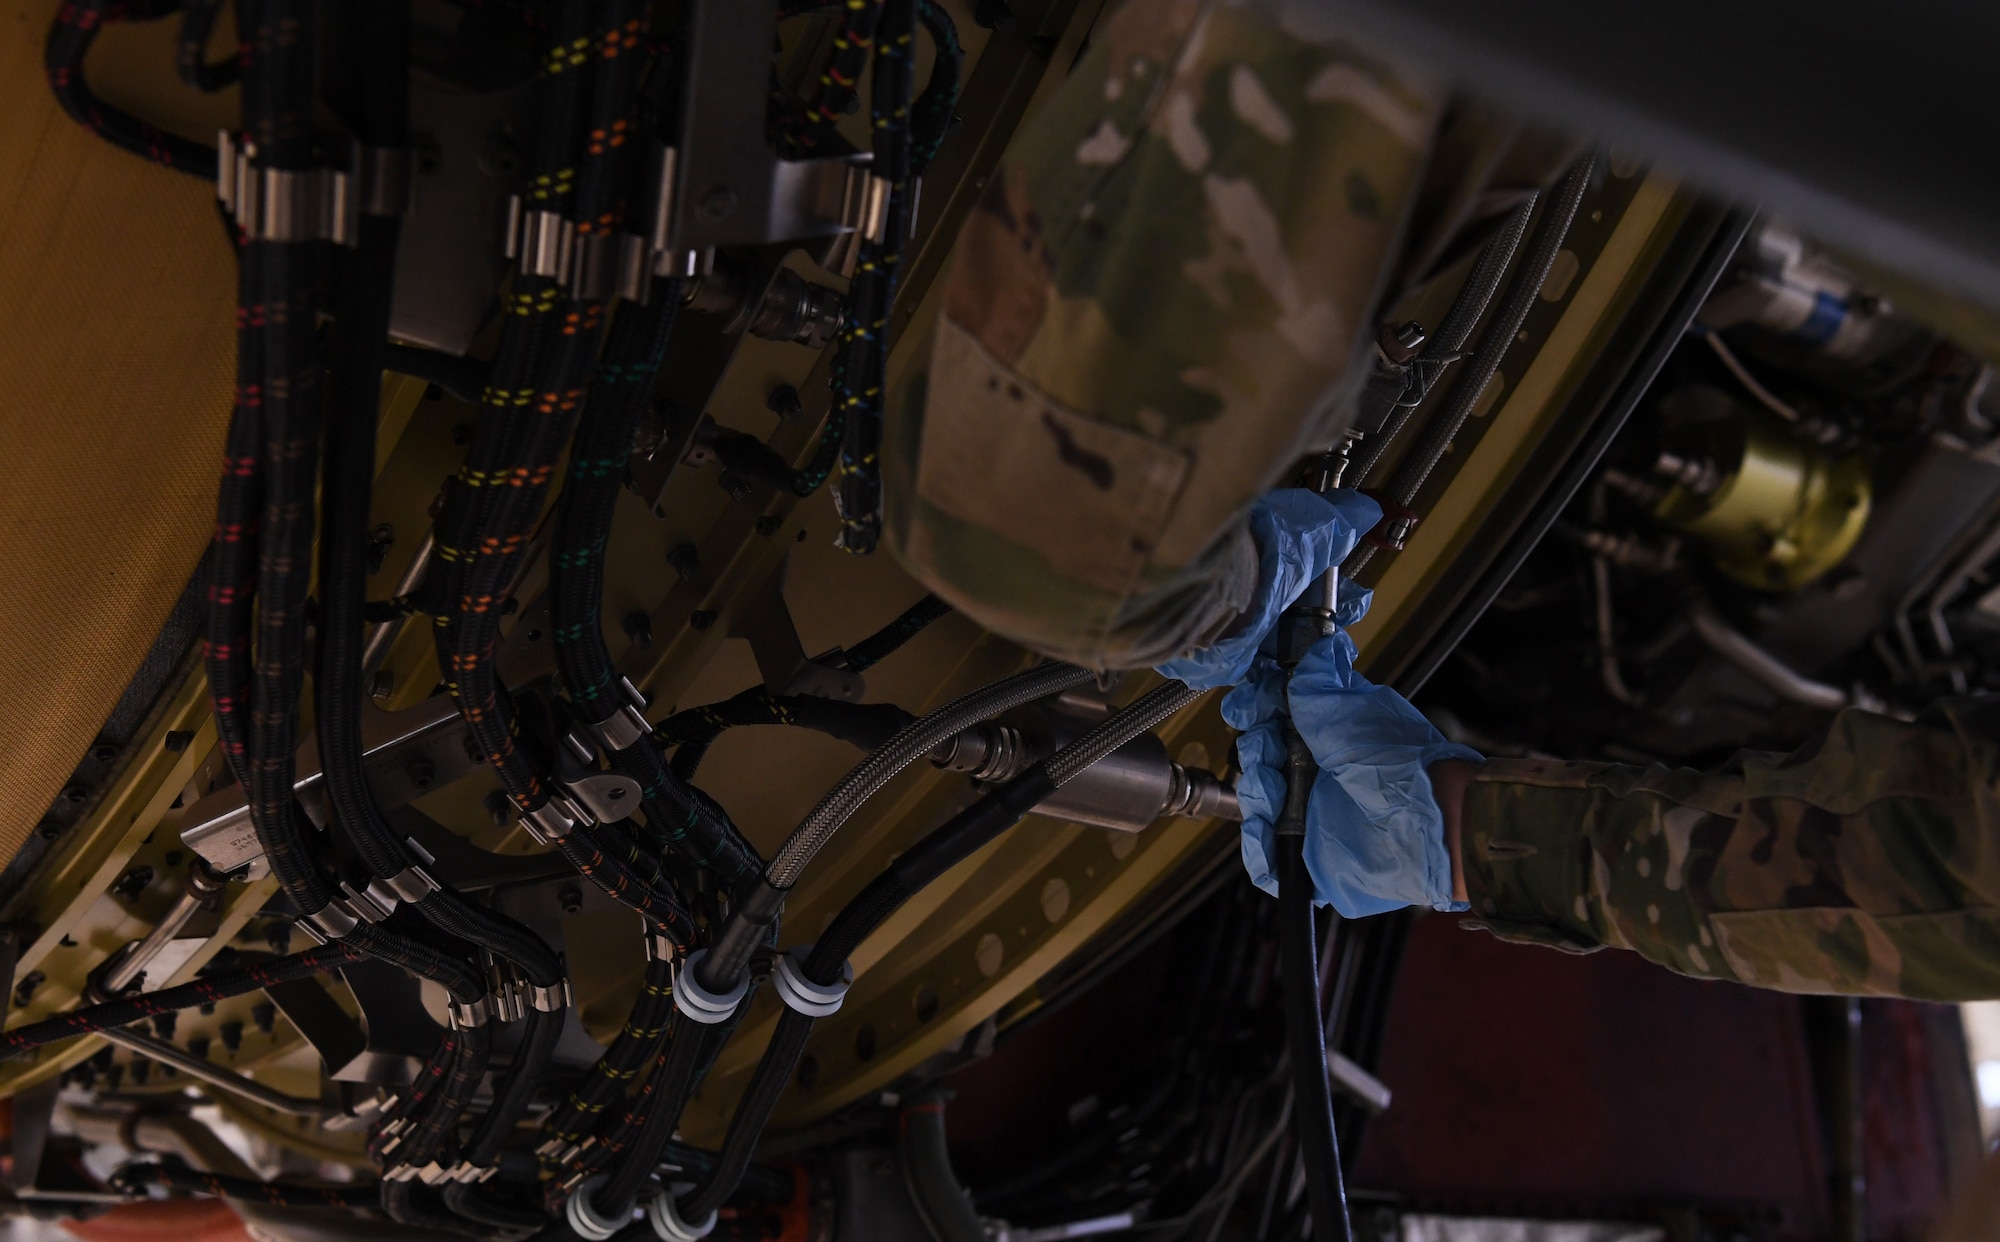 Senior Airman Teyana Jackson, a 725th Air Mobility Squadron aerospace propulsion technician, connects a hose to a C- 5 Super Galaxy aircraft engine during a 721st Air Mobility Squadron training at Ramstein Air Base, Germany, Dec. 11, 2020. Airmen from Incirlik AB, Turkey, Rota AB, Spain, Spangdahlem AB, Germany and Ramstein AB attended the training to develop their maintenance proficiency. The 721st Air Mobility Squadron provides command and control, aerial port, and aircraft maintenance in support of the national military strategy to sustain forces worldwide. (U.S. Air Force photo by Senior Airman Thomas Karol)